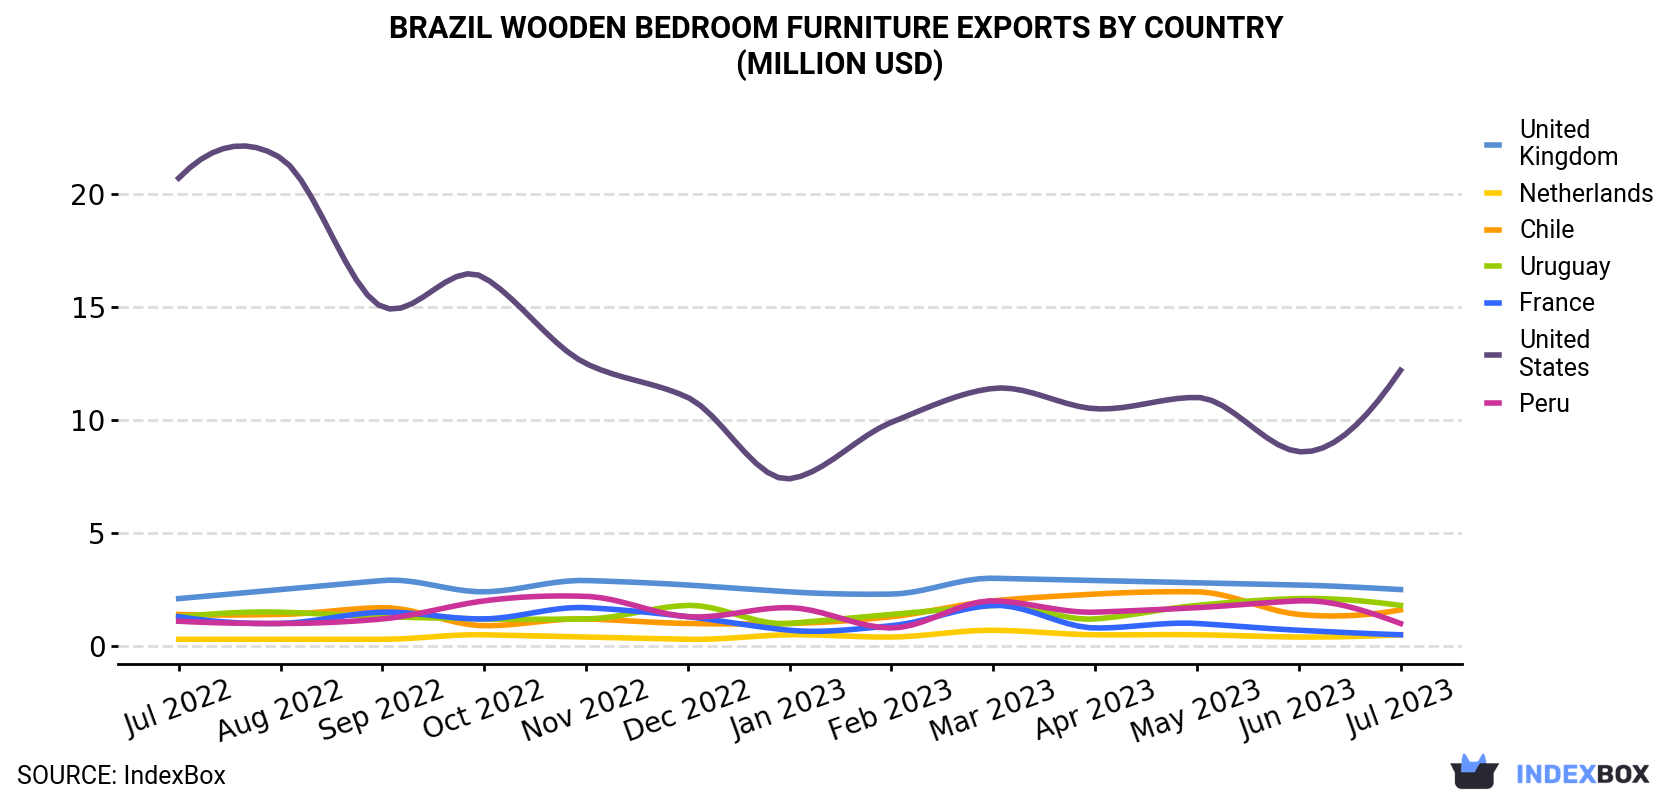 Brazil Wooden Bedroom Furniture Exports By Country (Million USD)